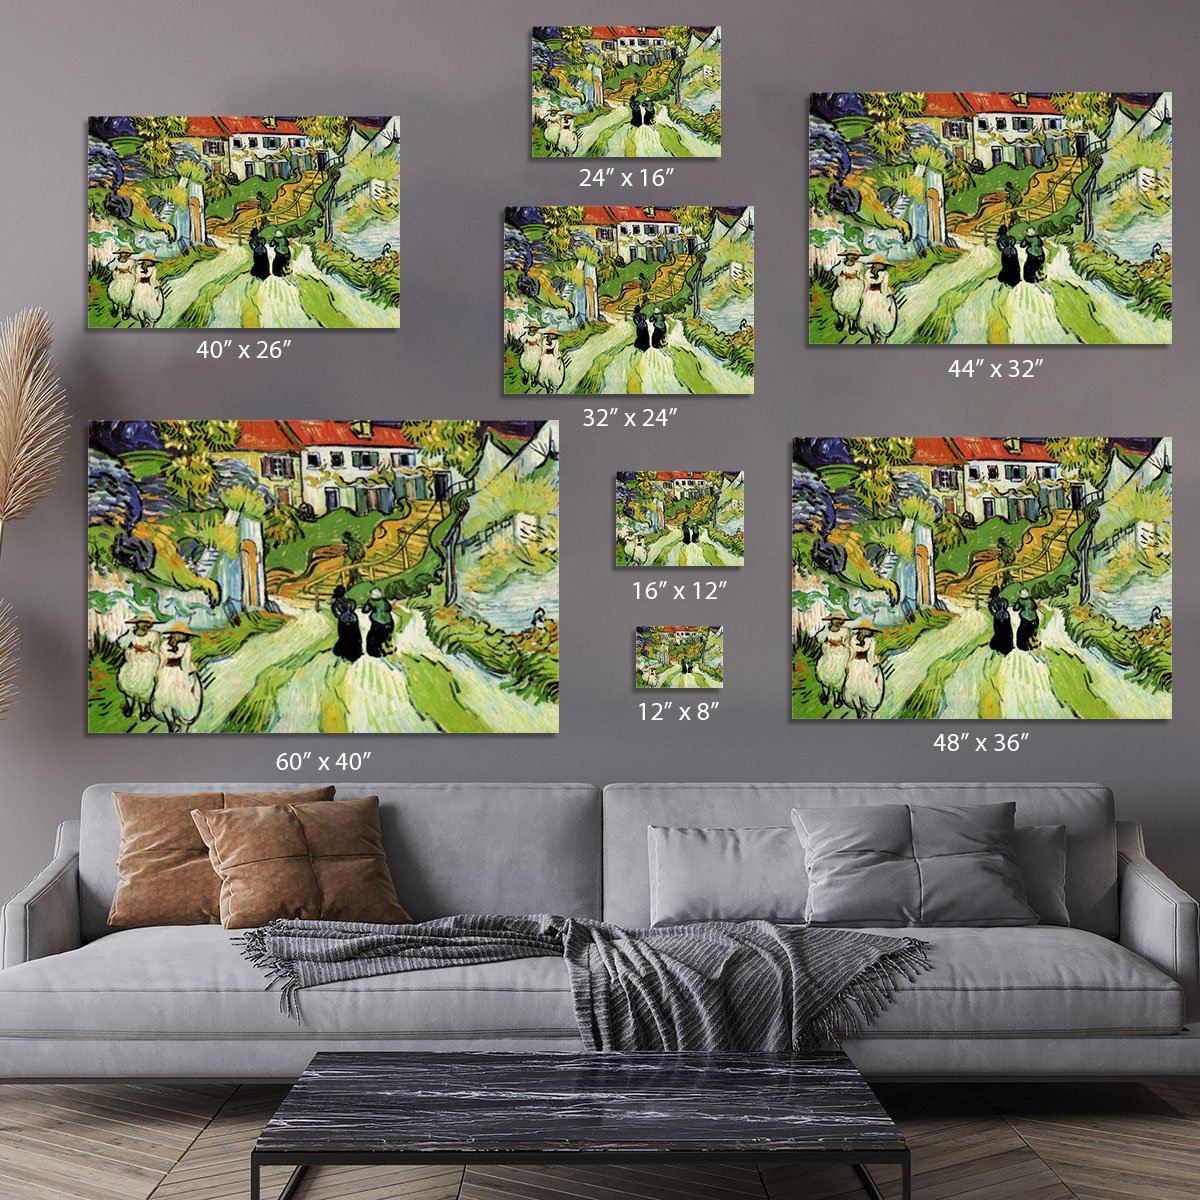 Village Street and Steps in Auvers with Figures by Van Gogh Canvas Print or Poster